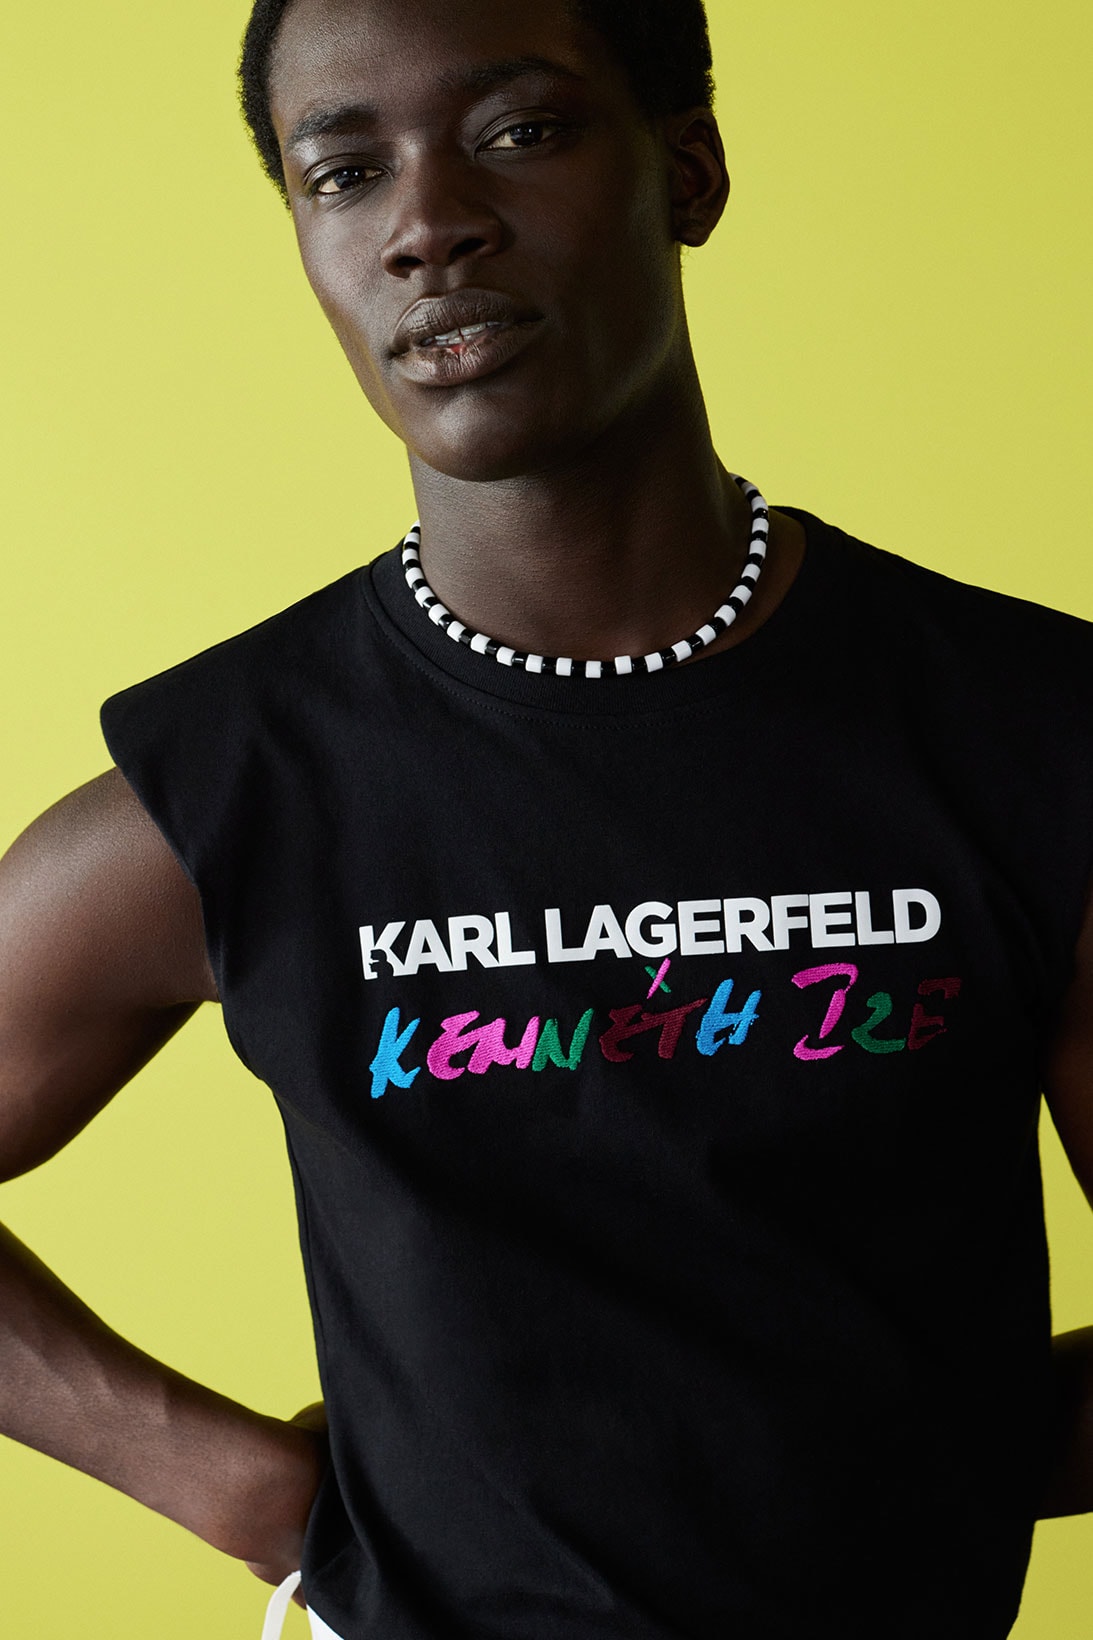 kenneth ize karl lagerfeld collaboration spring summer carine roitfeld sustainable knitwear release price where to buy